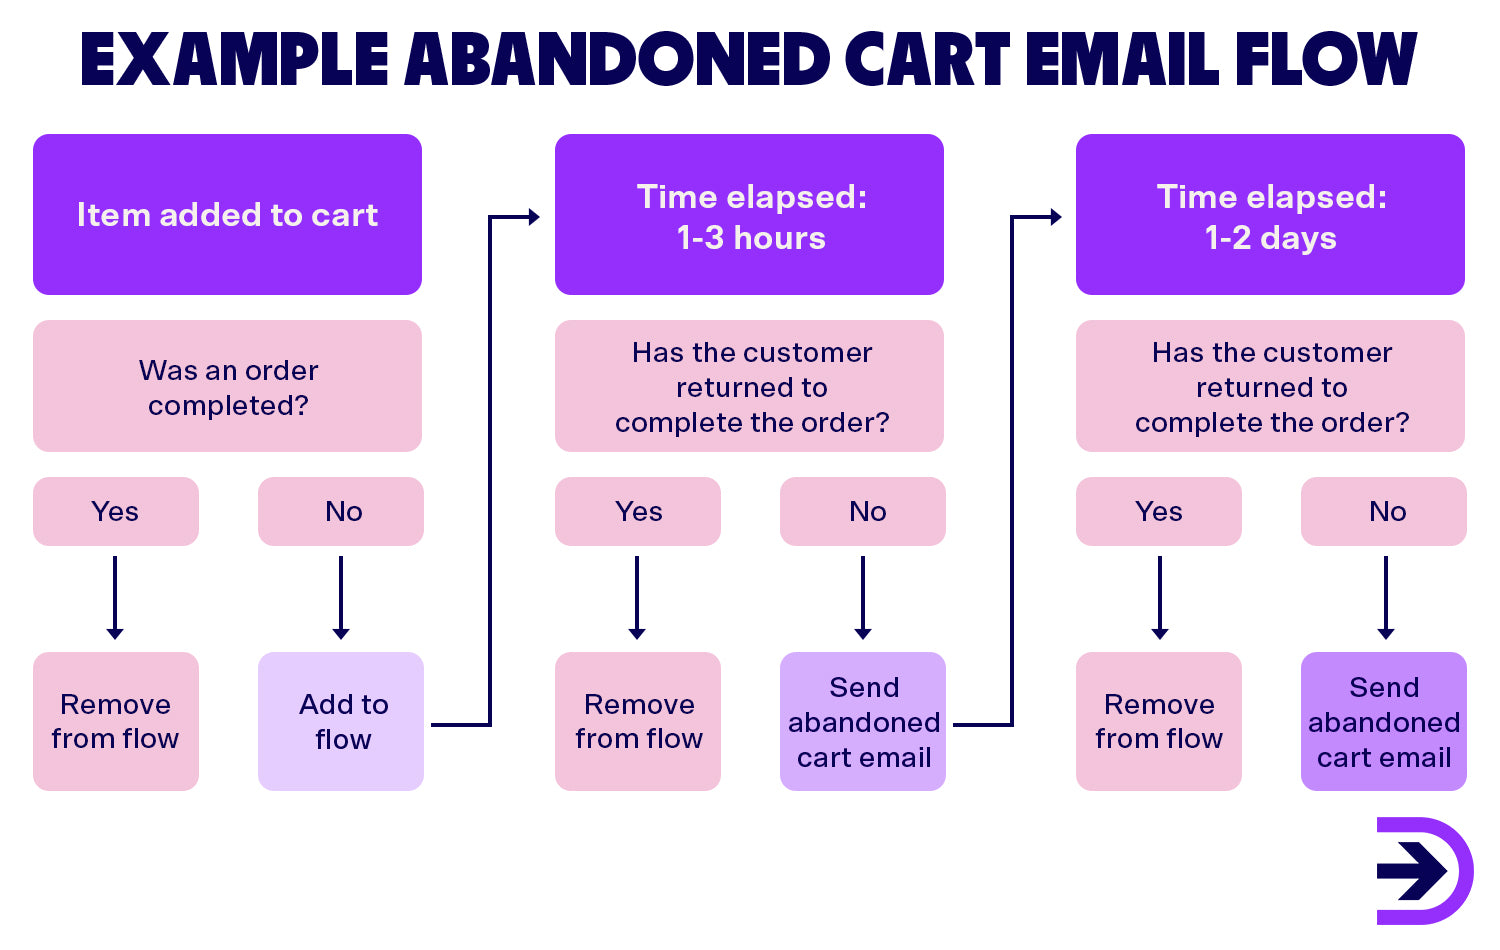 An example abandoned cart email flow shows approximately how soon after a customer abandons their cart you should send them a reminder.